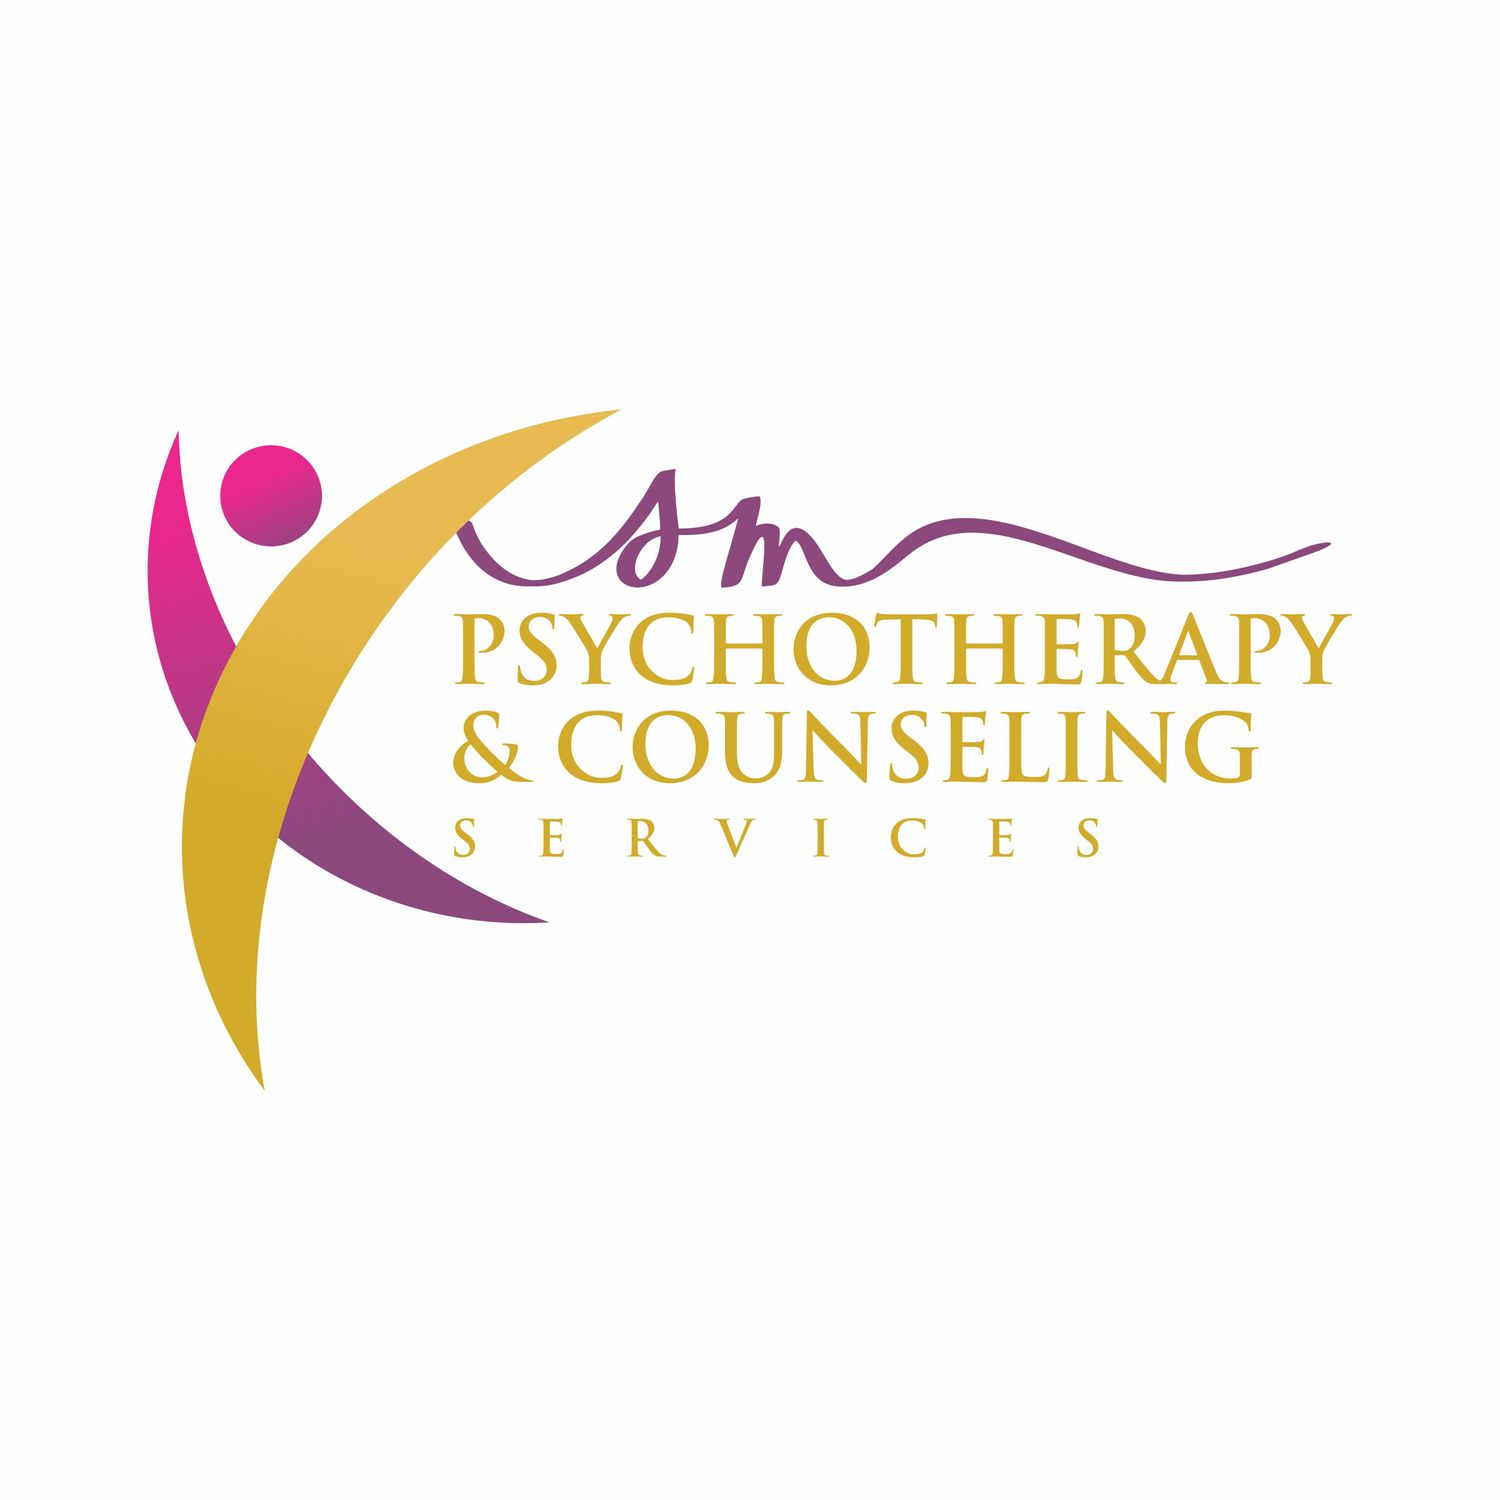 Gallery Photo of SMPsychotherapy & Counseling Services 